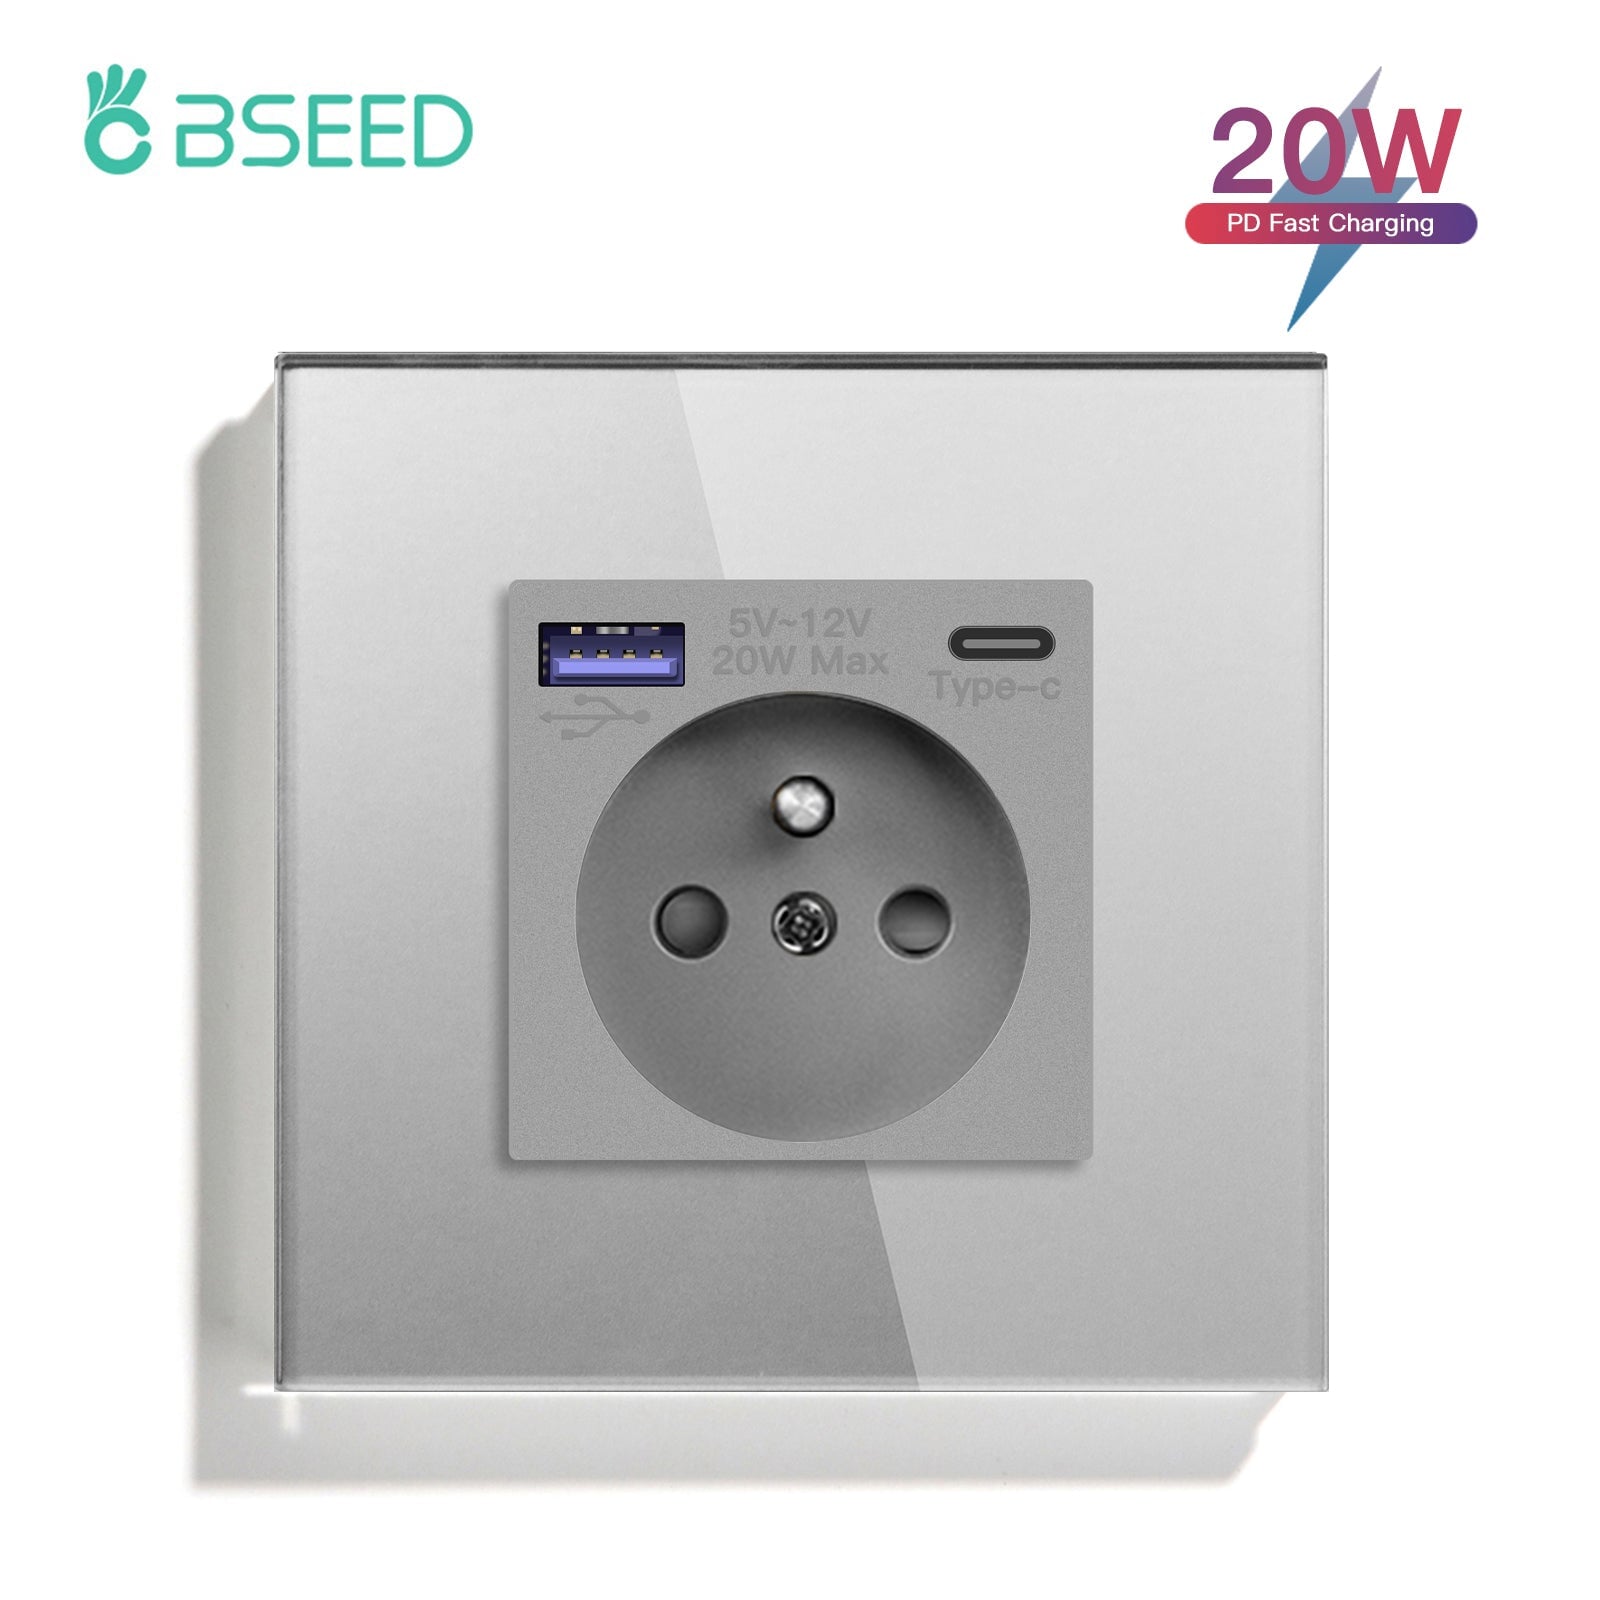 BSEED FR sockets with 20W PD Fast Charge Type-C Interface Outlet Wall Socket Power Outlets & Sockets Bseedswitch Grey Signle 